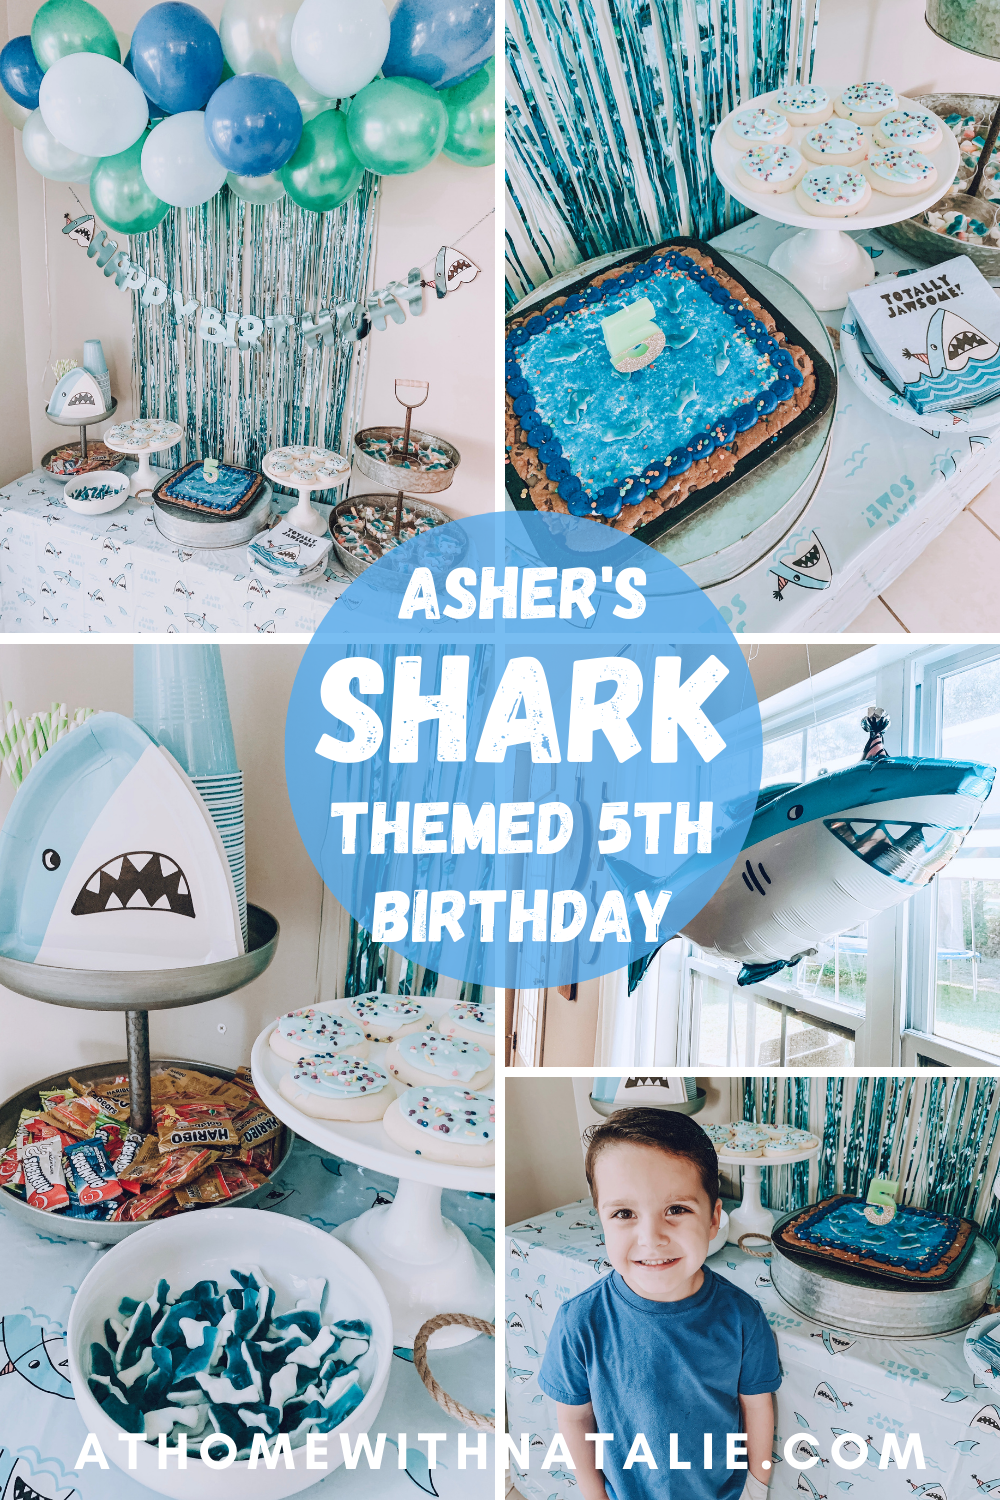 Asher's 5th Birthday-Shark Party Theme – At Home With Natalie